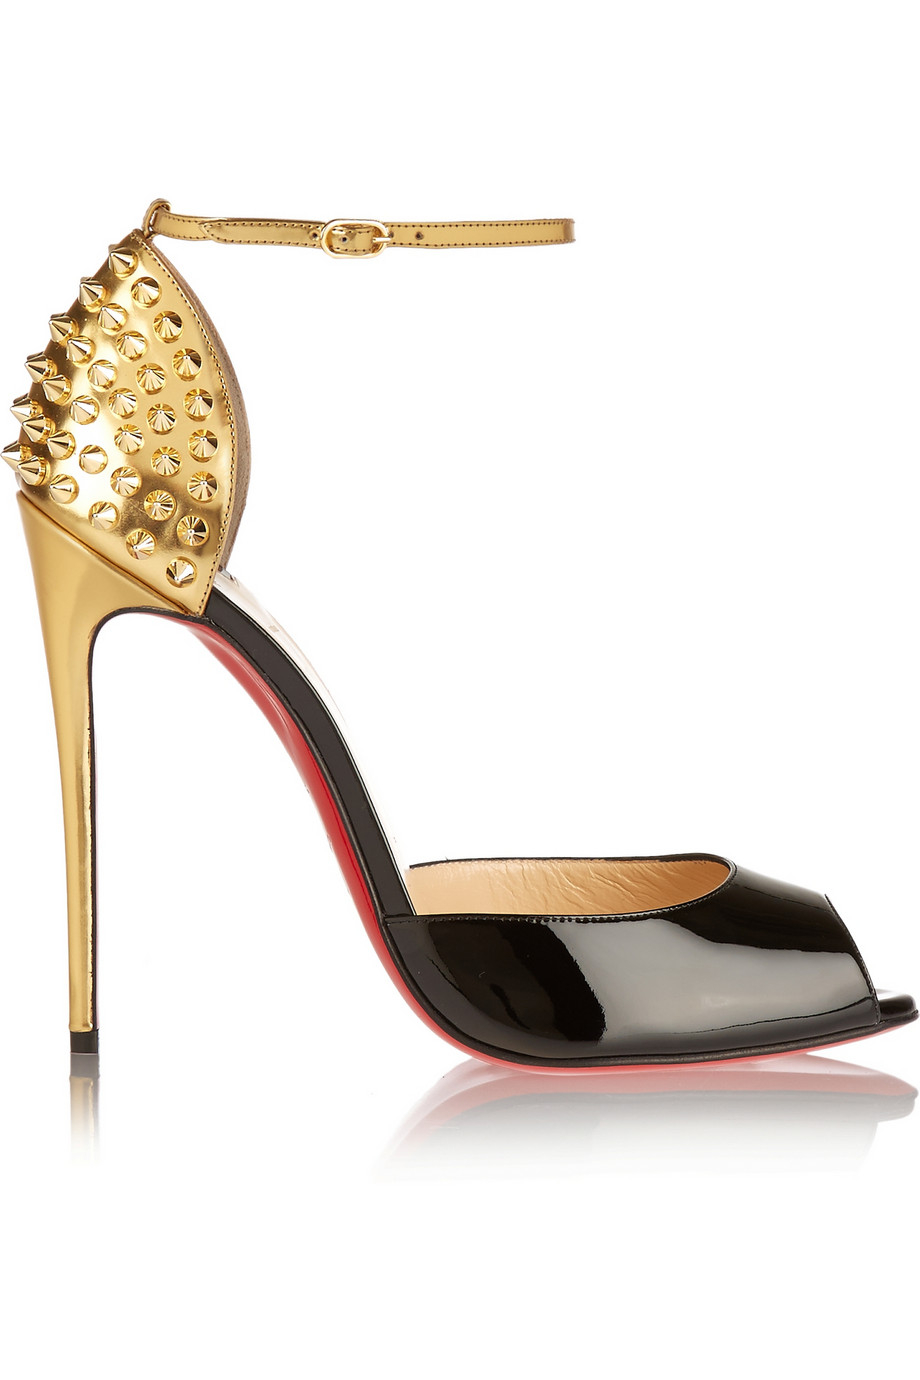 christian-louboutin-black-pina-spike-120-patent-leather-pumps-product-1-21275072-5-957340439-normal.jpeg